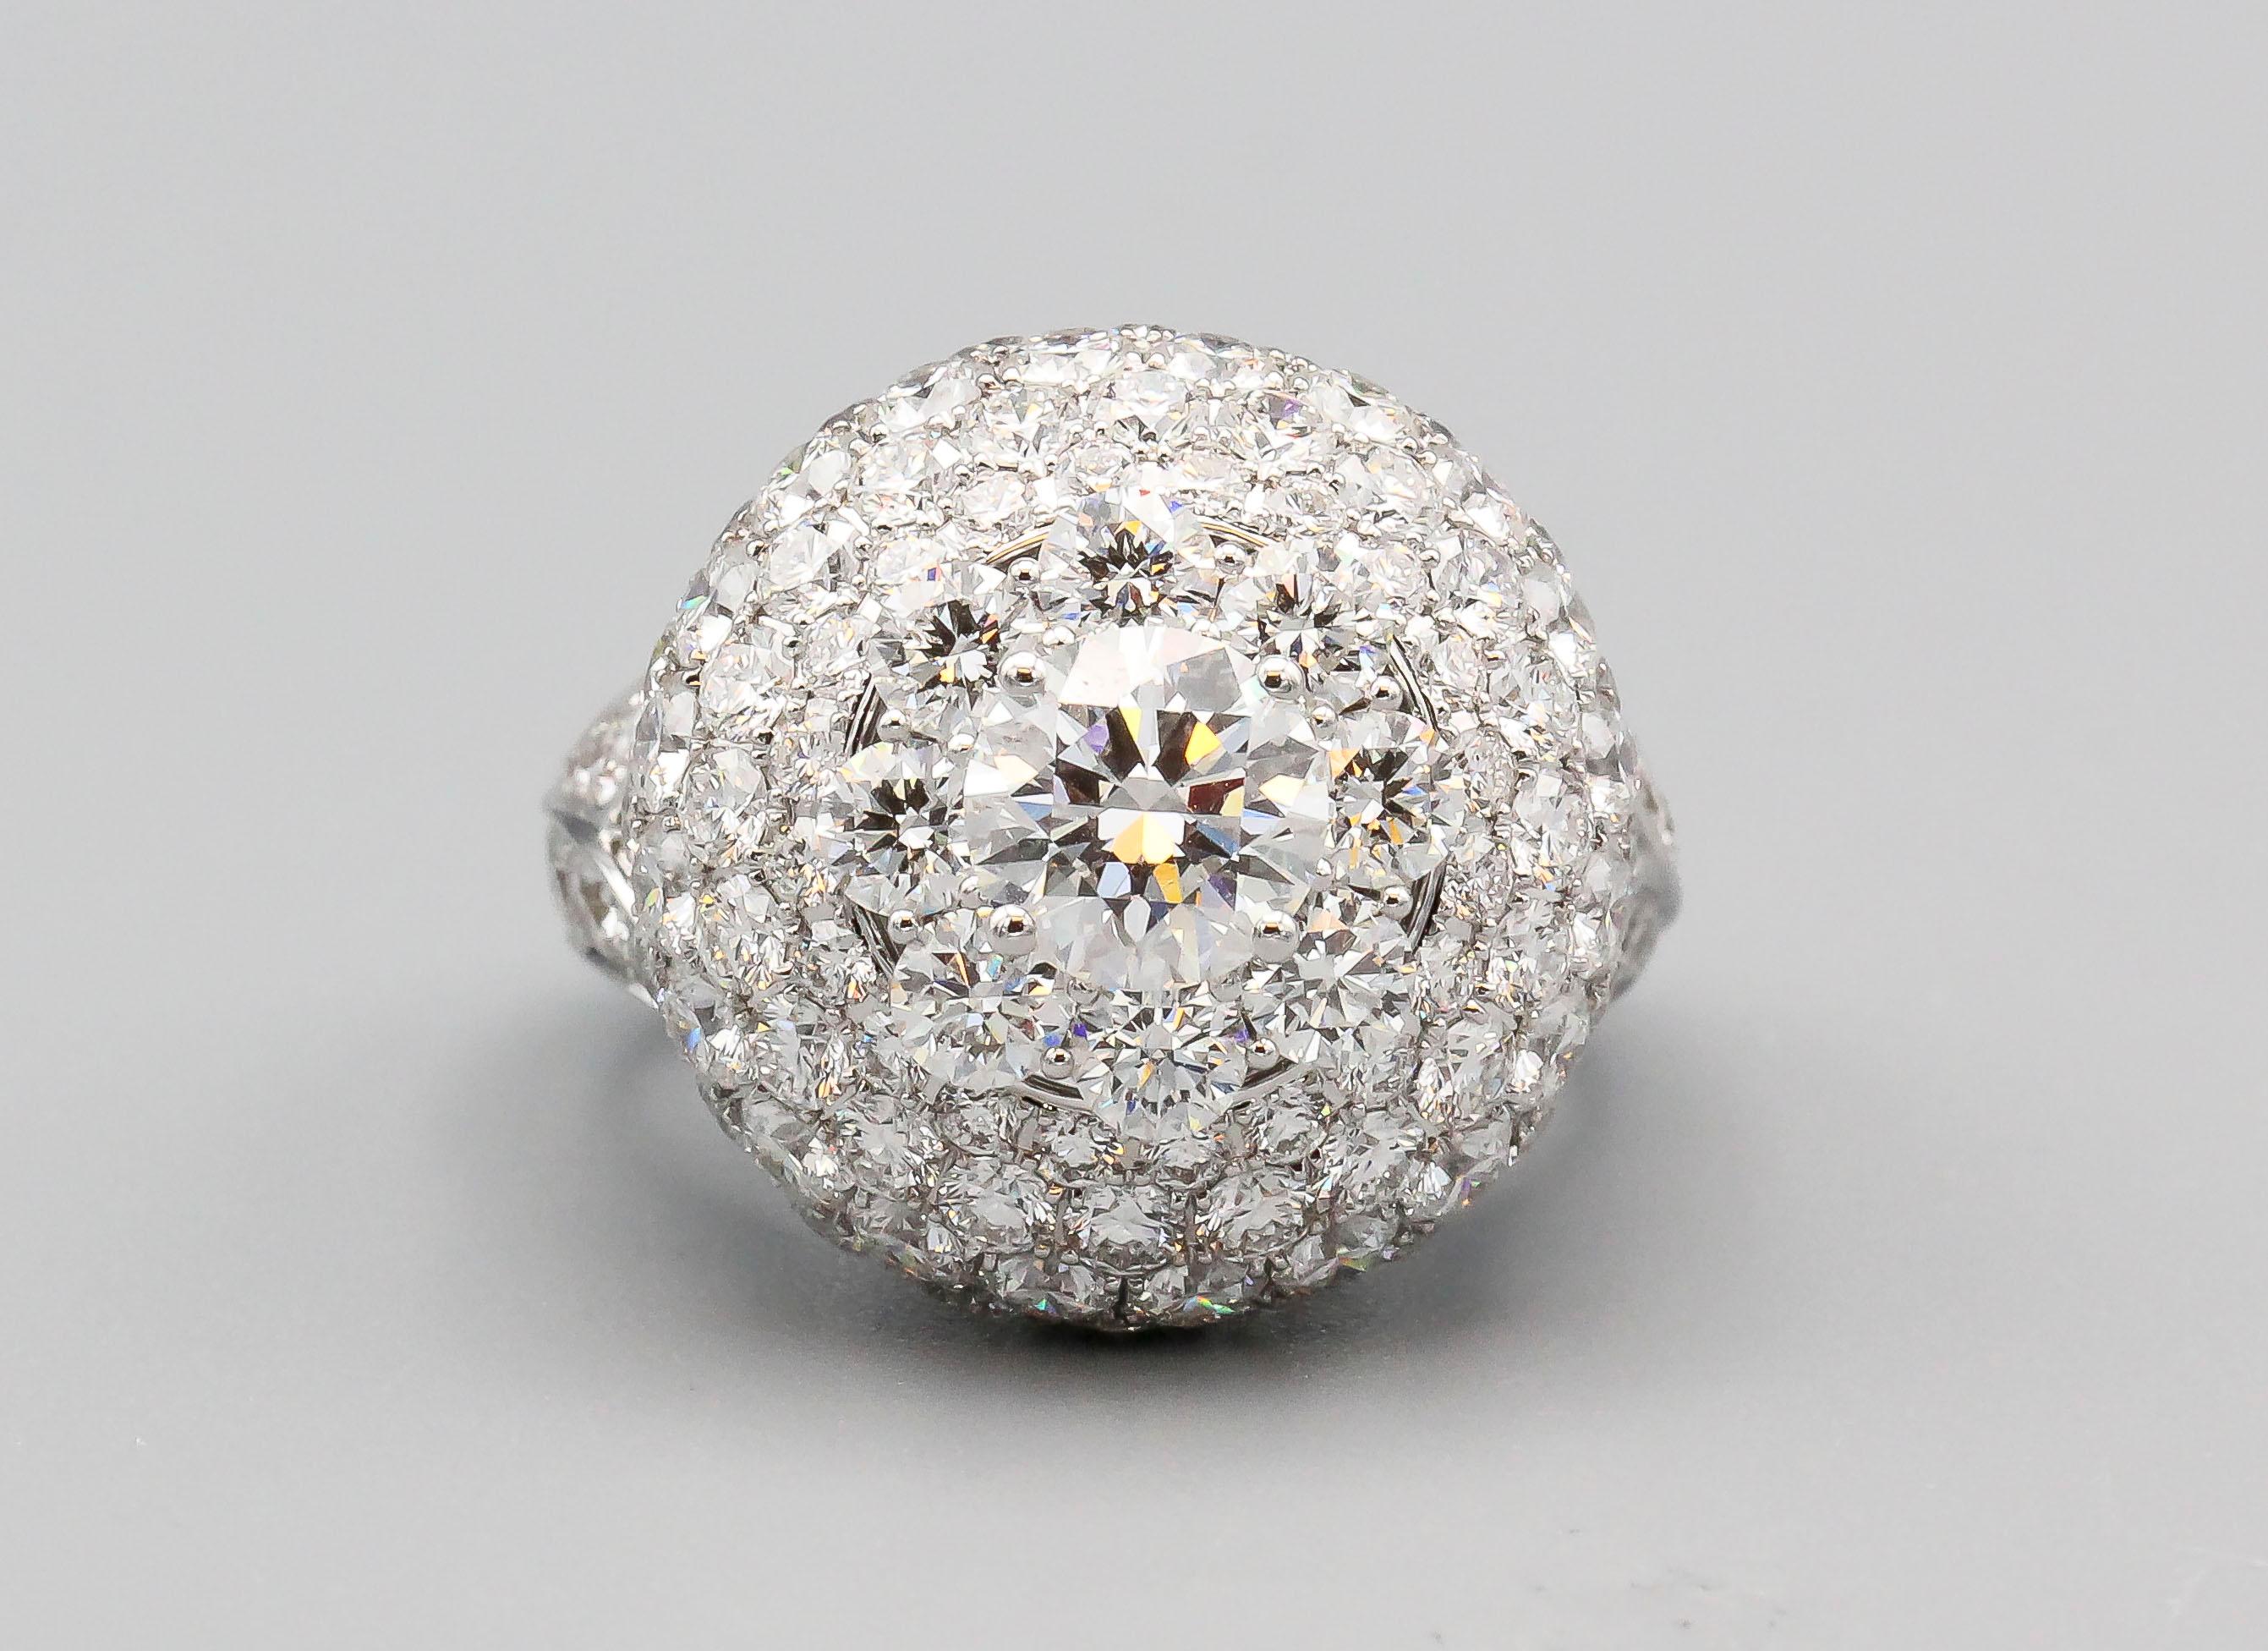 Very fine diamond and 18K white gold dome ring by Graff. It features a 1.22 carat F color VS2 round brilliant cut diamond center stone; further complimented with various high grade round brilliant cut diamonds in a pave setting, approx. 9 carats in